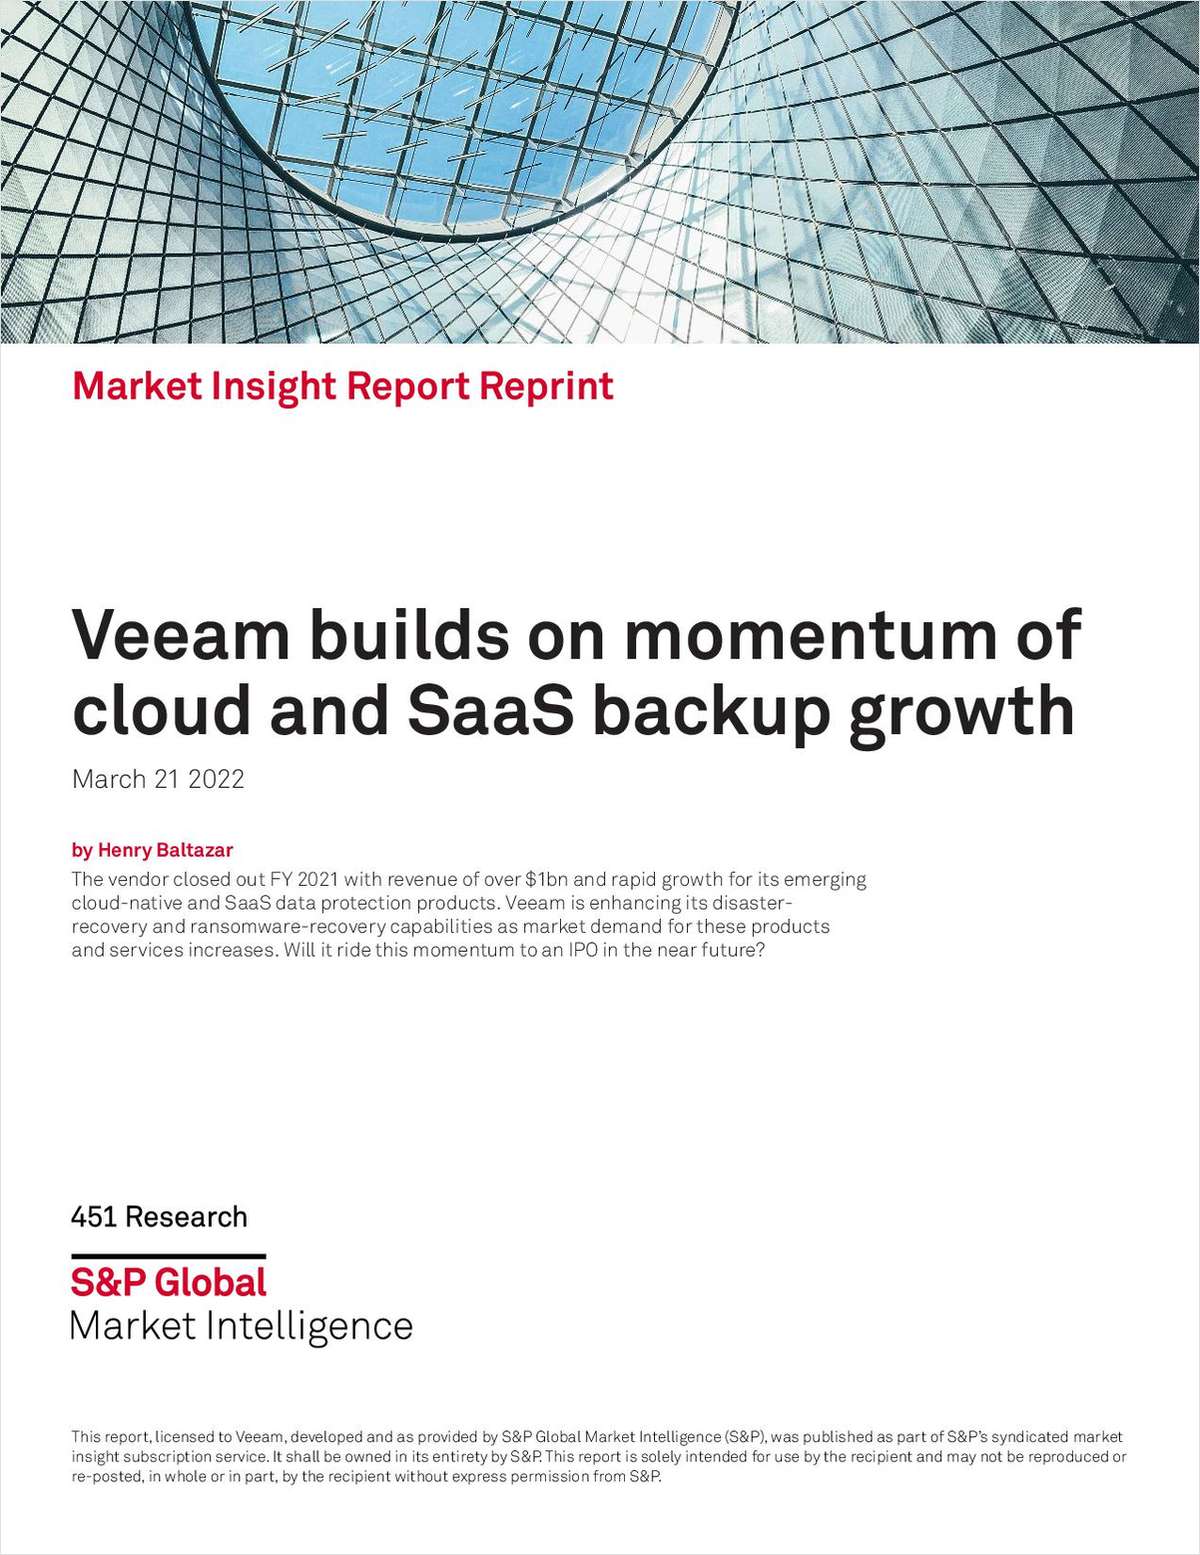 Market Insight Report: Veeam builds on momentum of cloud and SaaS backup growth